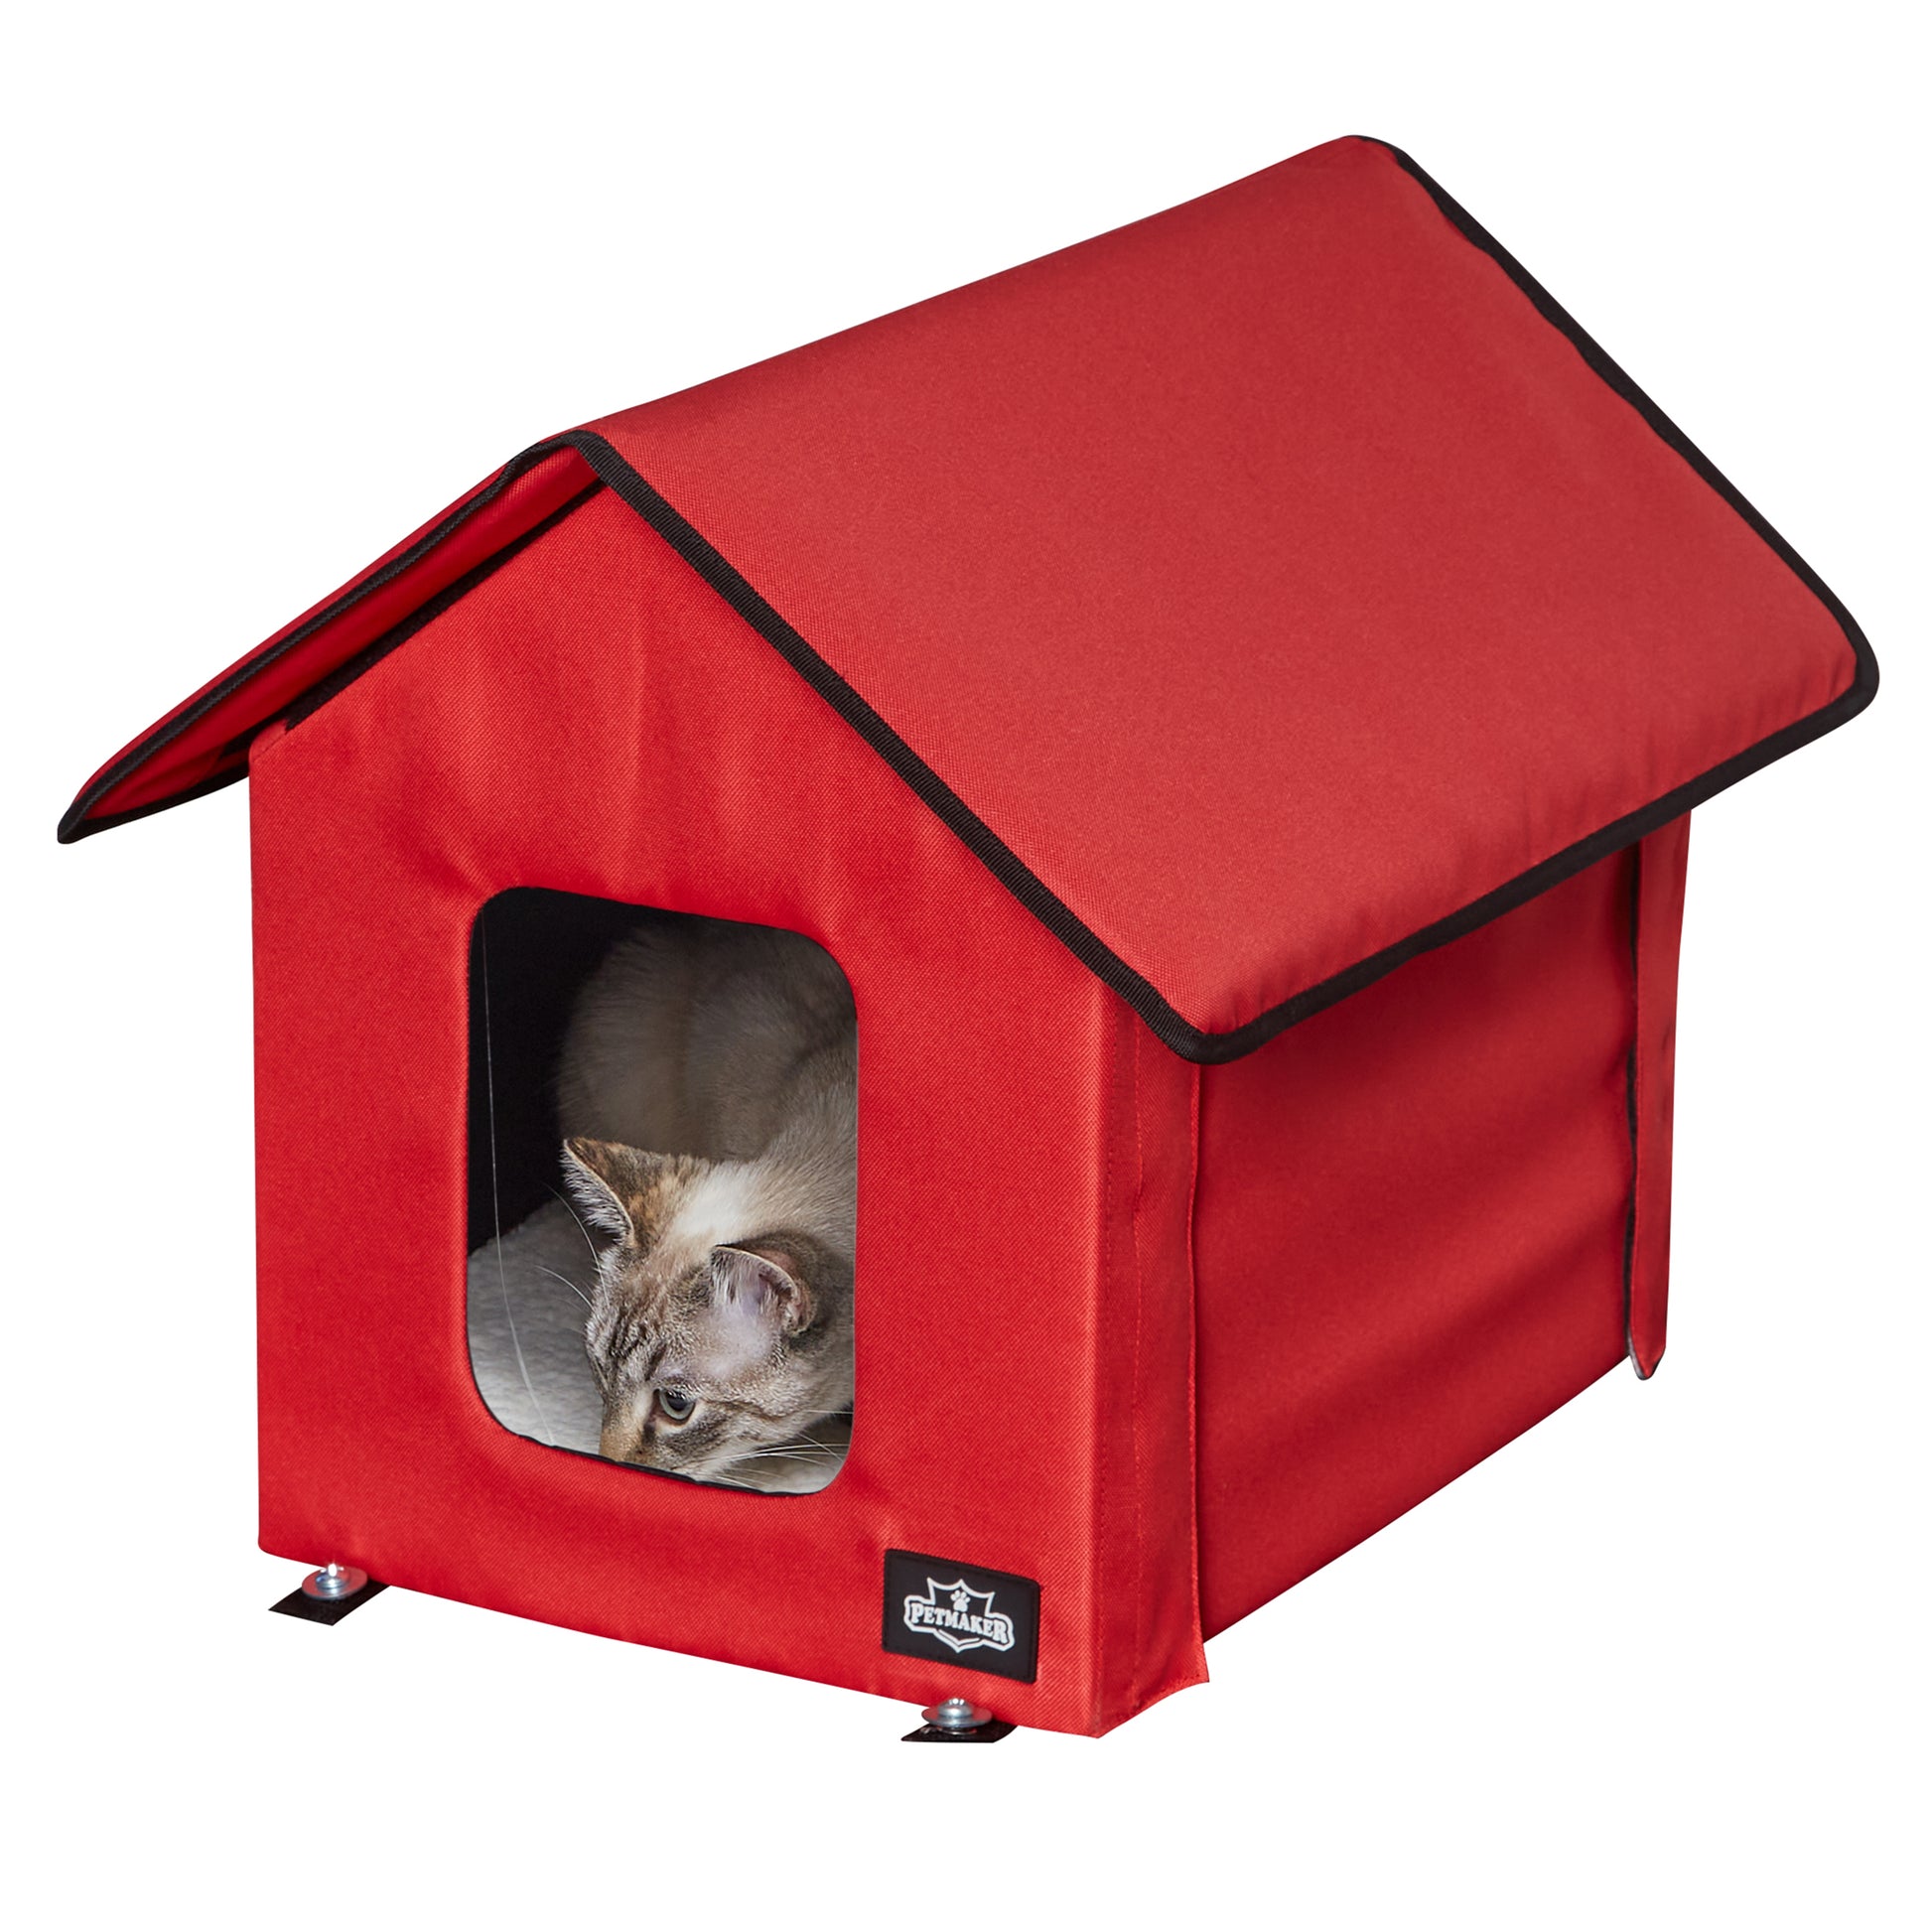 Siamese cat has nose down toward the front door of a red pet house while the cat prepares to pounce on the happenings outside of the pet house. 